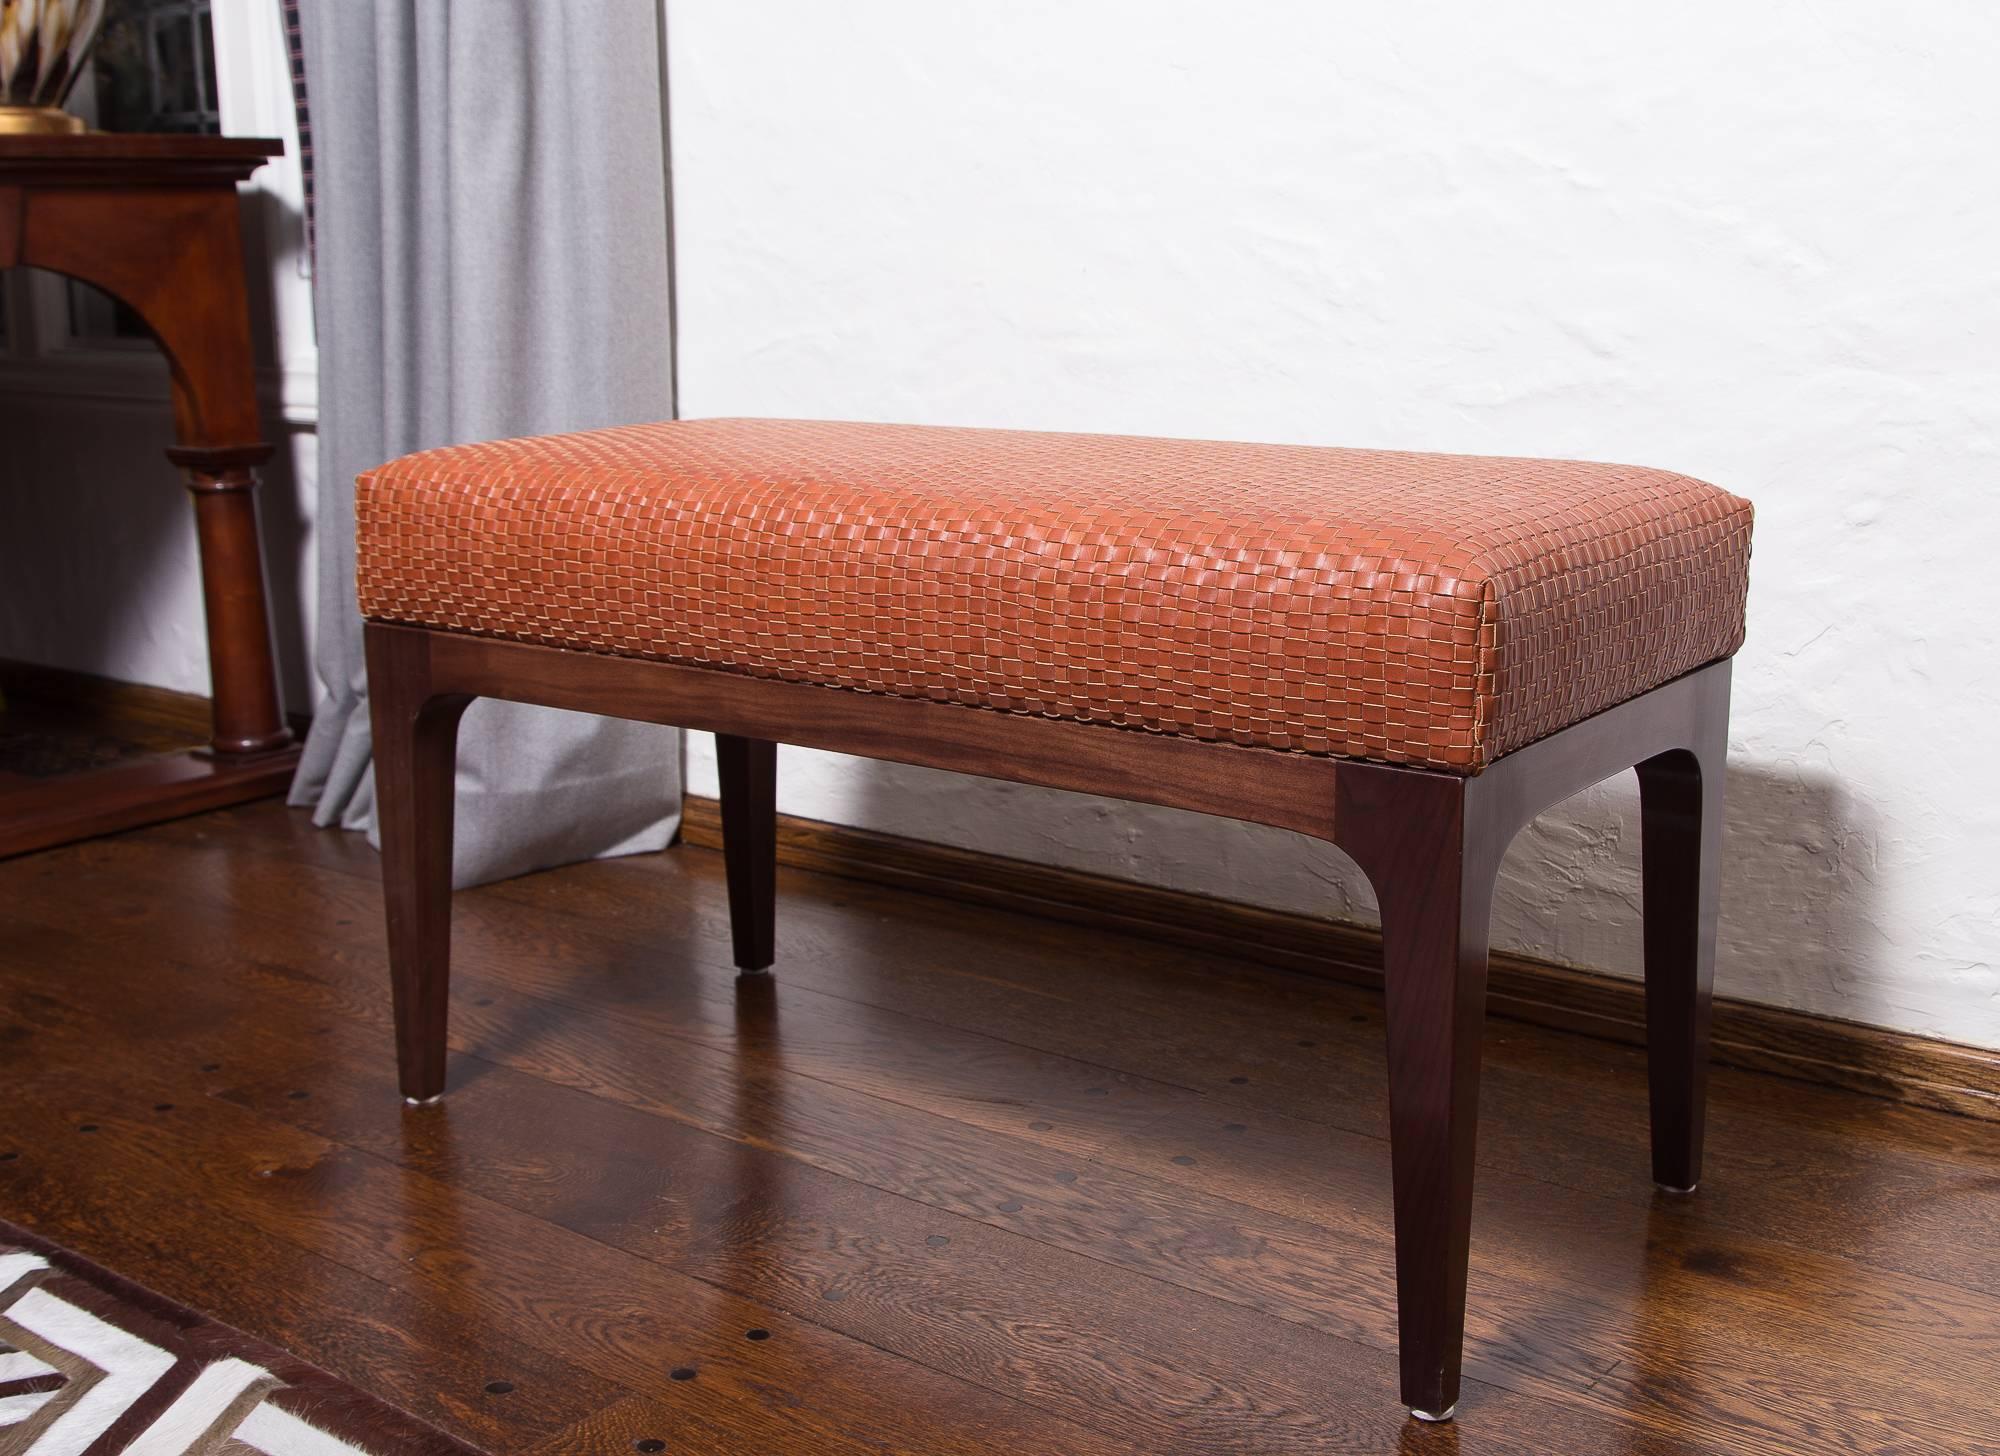 The Raphael bench – Mid-Century Modern woven leather 3 ft bench.

Gandwoven Italian leather in luggage.
Italian leather.
Mid-Century Modern frame.
Natural stain.
Walnut wood.
Measures: 36